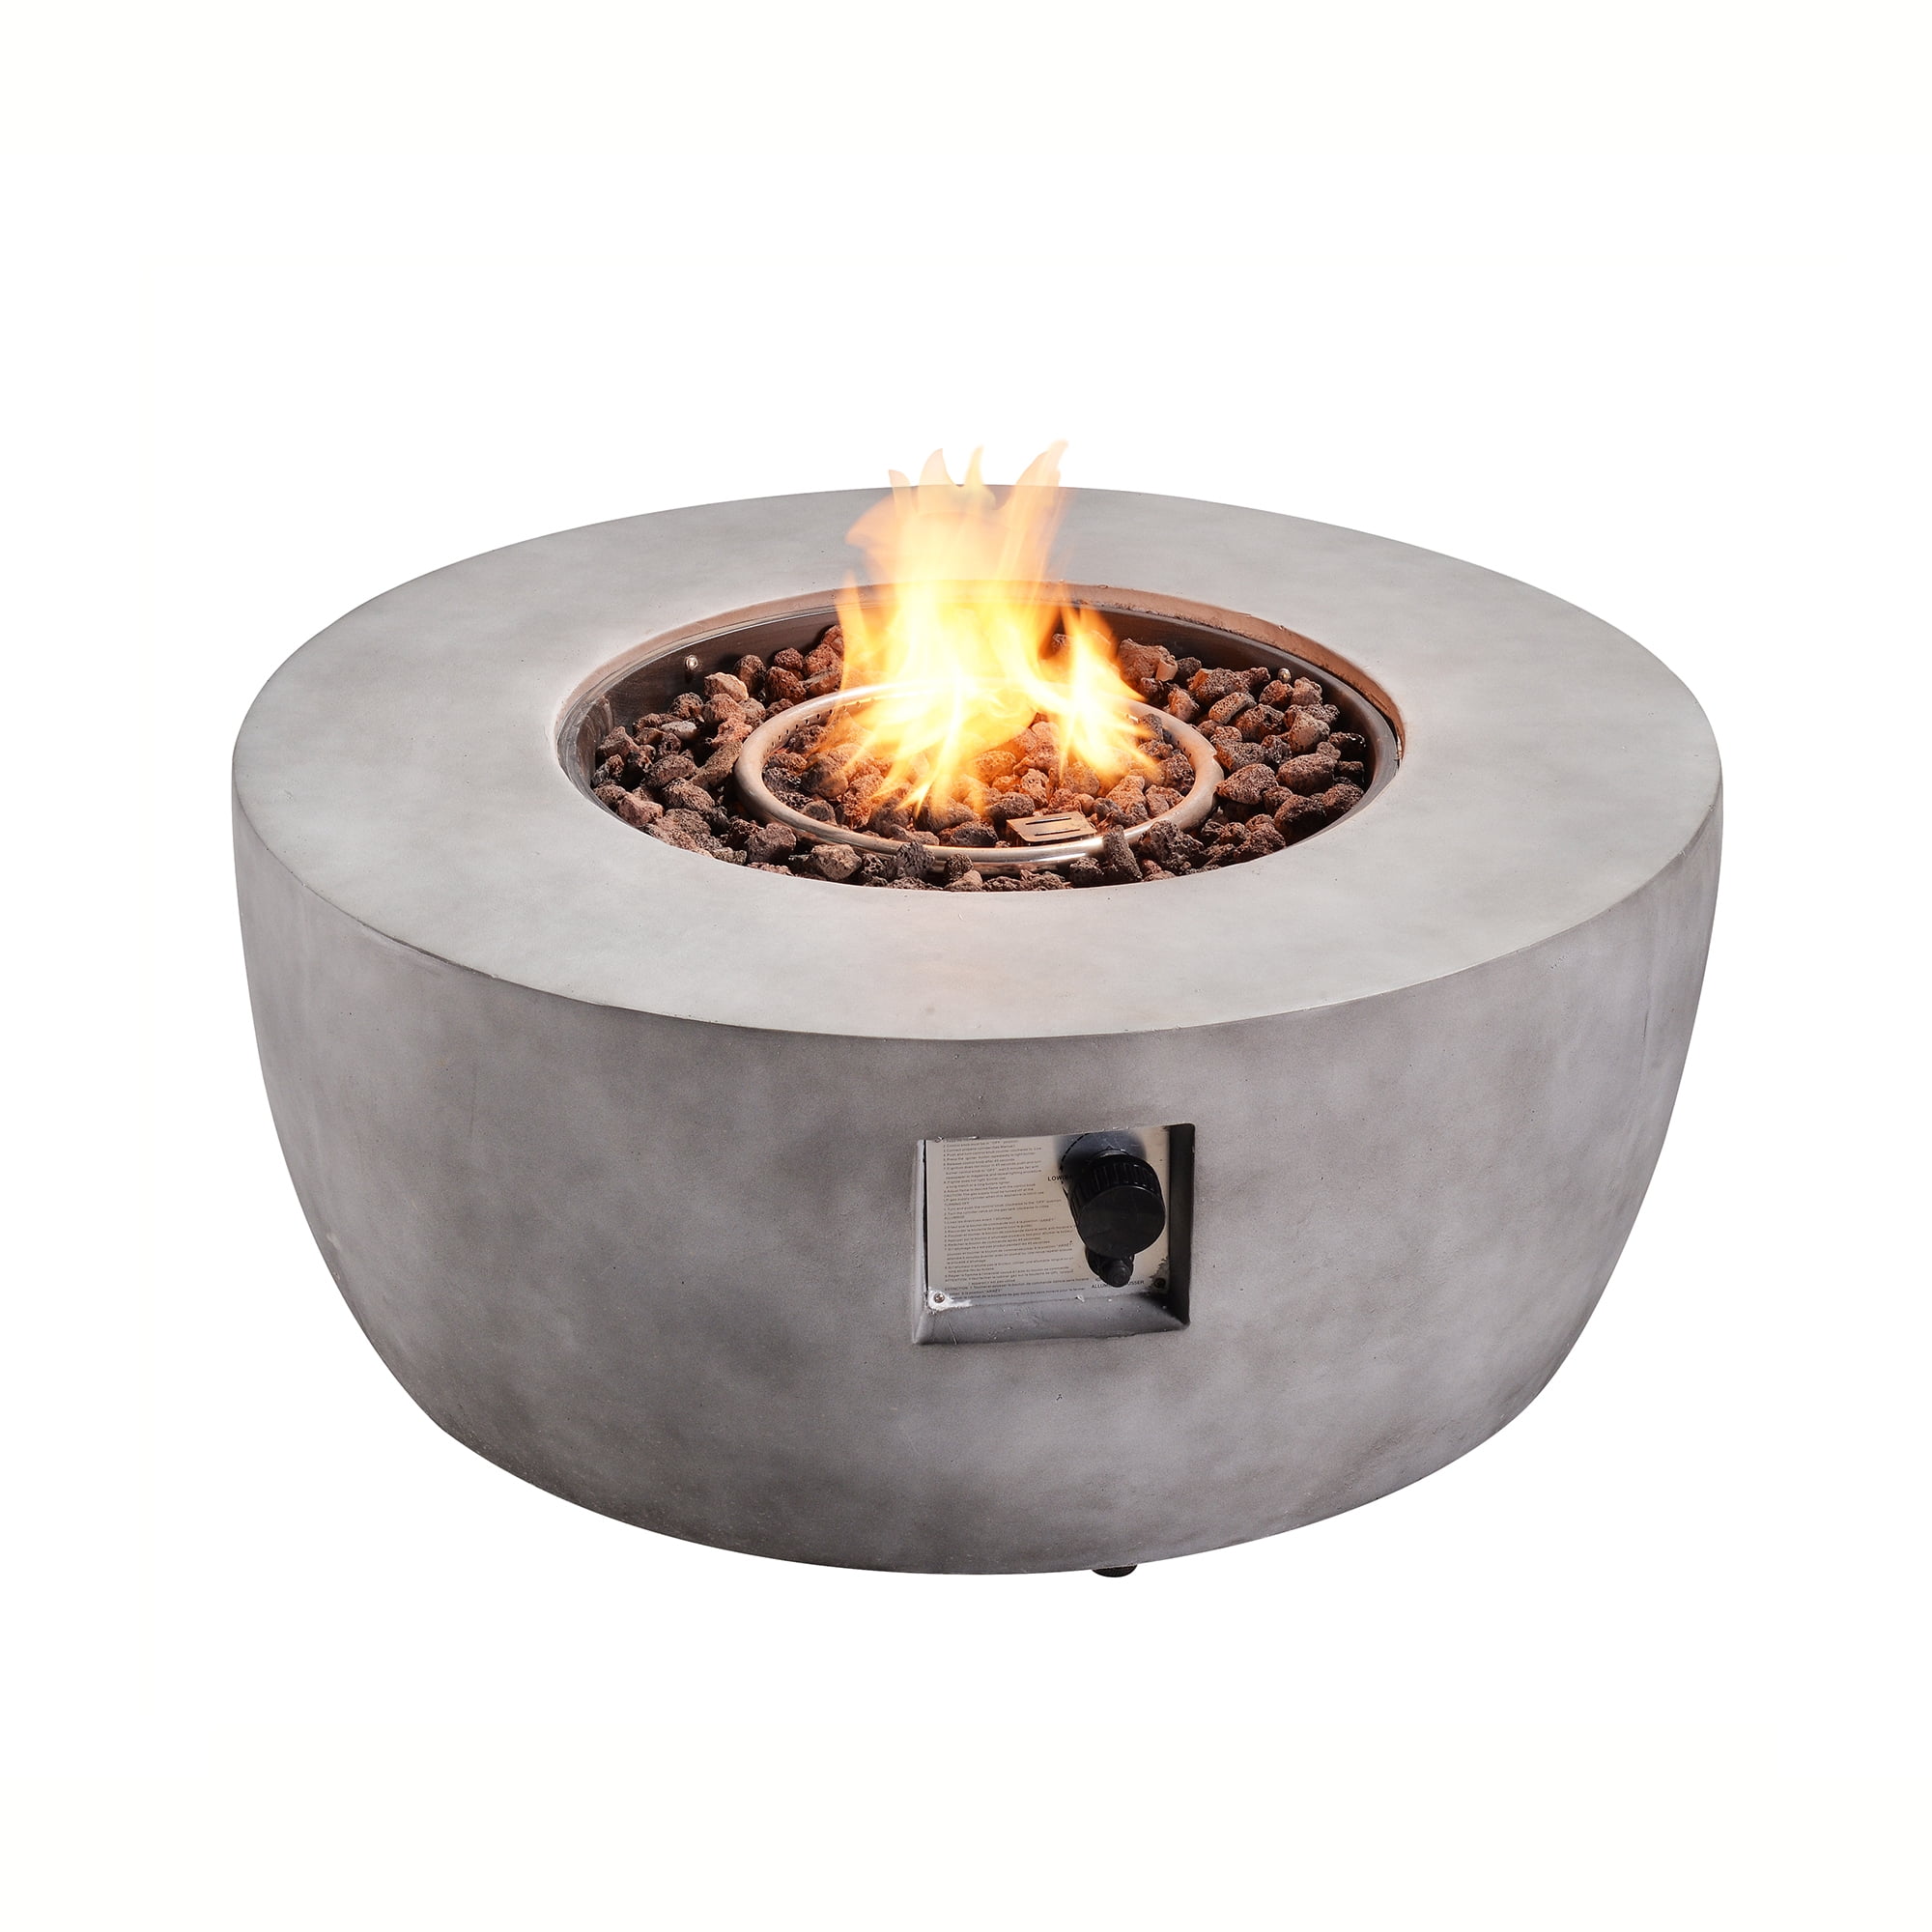 Peaktop 36 Outdoor Round Gas Fire Pit, Concrete Outdoor Fire Pit